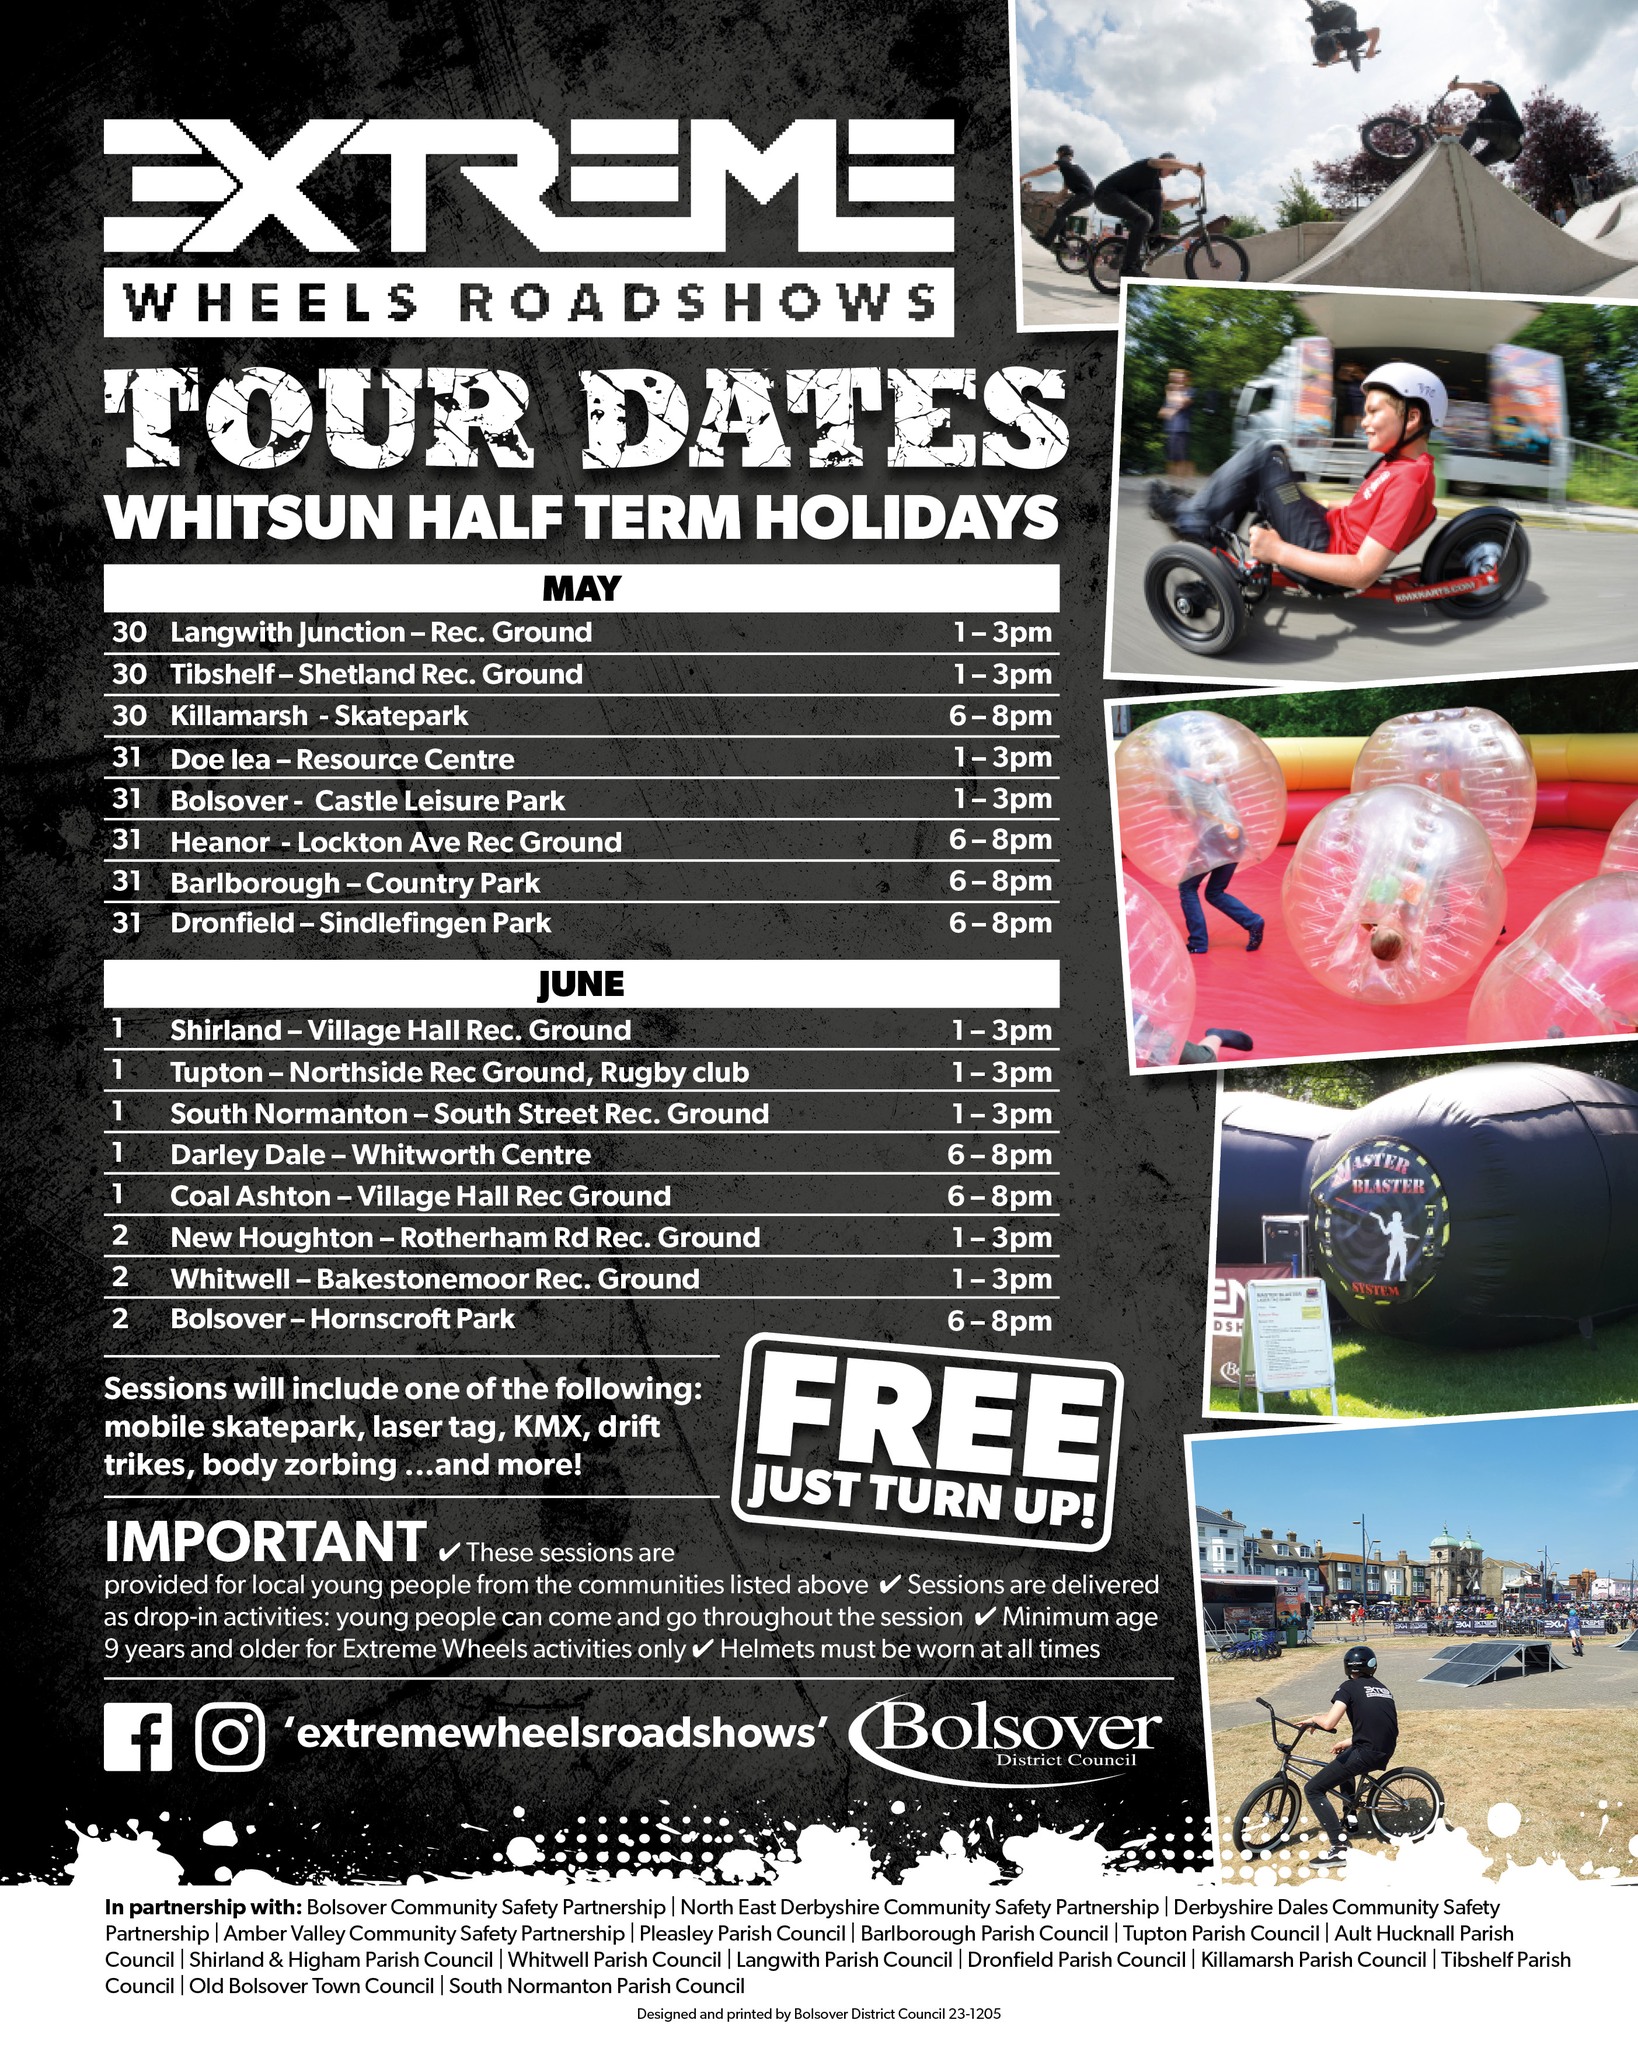 Extreme Wheels Roadshow to visit South Normanton, Shirland and Tibshelf in half term